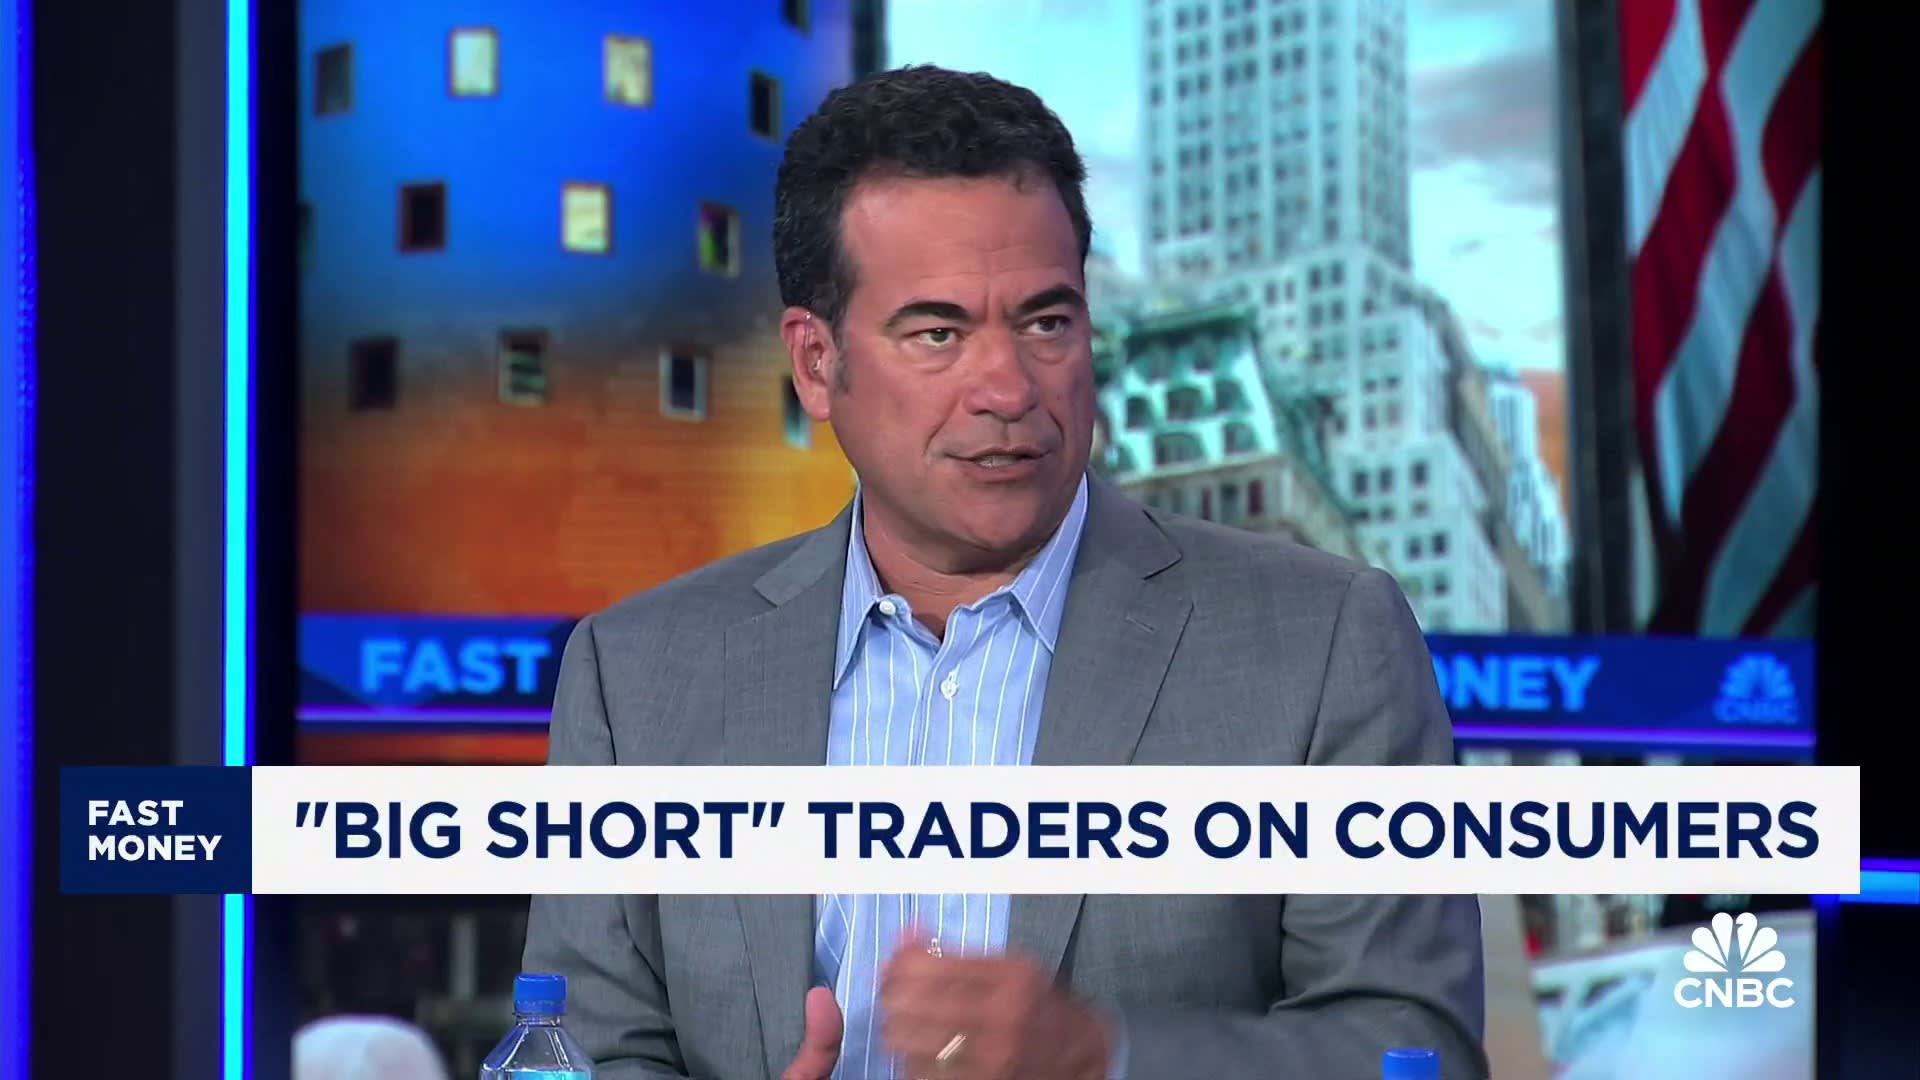 CNBC Exclusive: Big Short traders tackle markets and economy [Video]